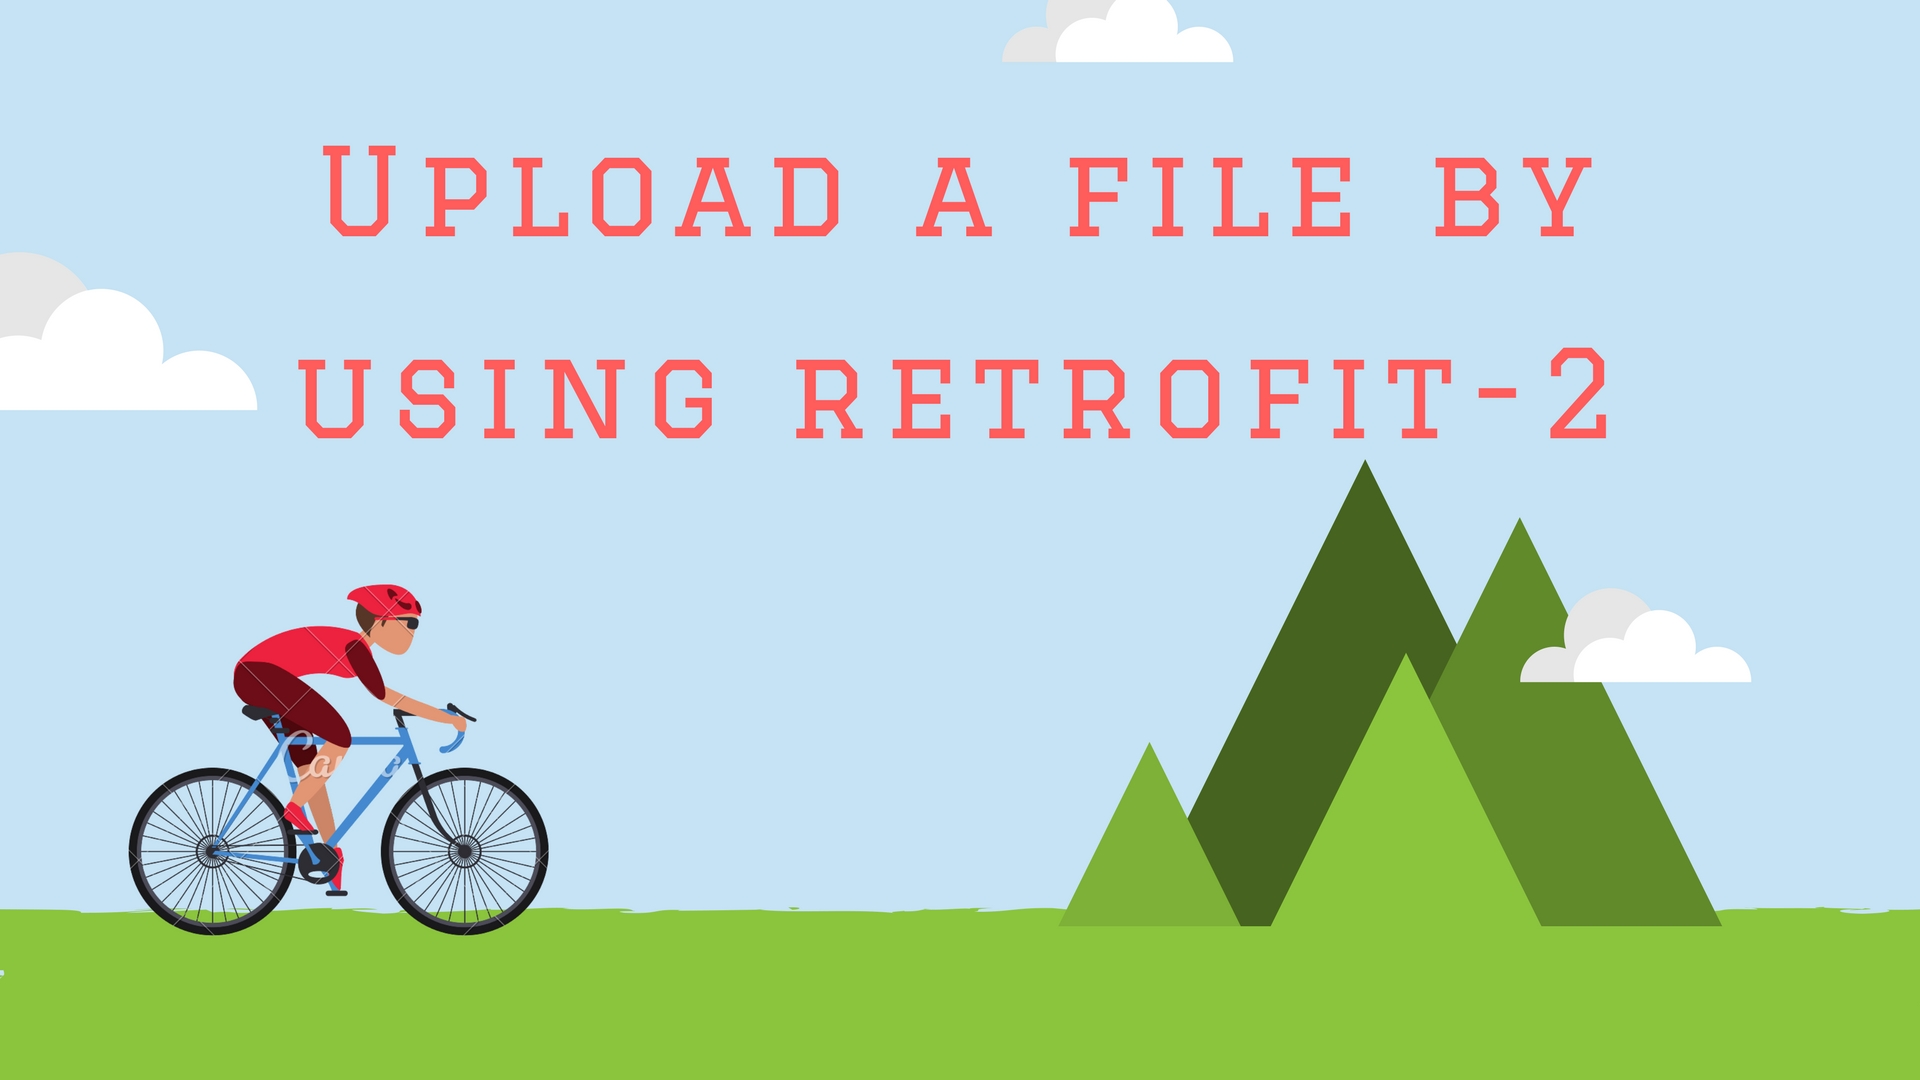 Upload a file by using retrofit in android